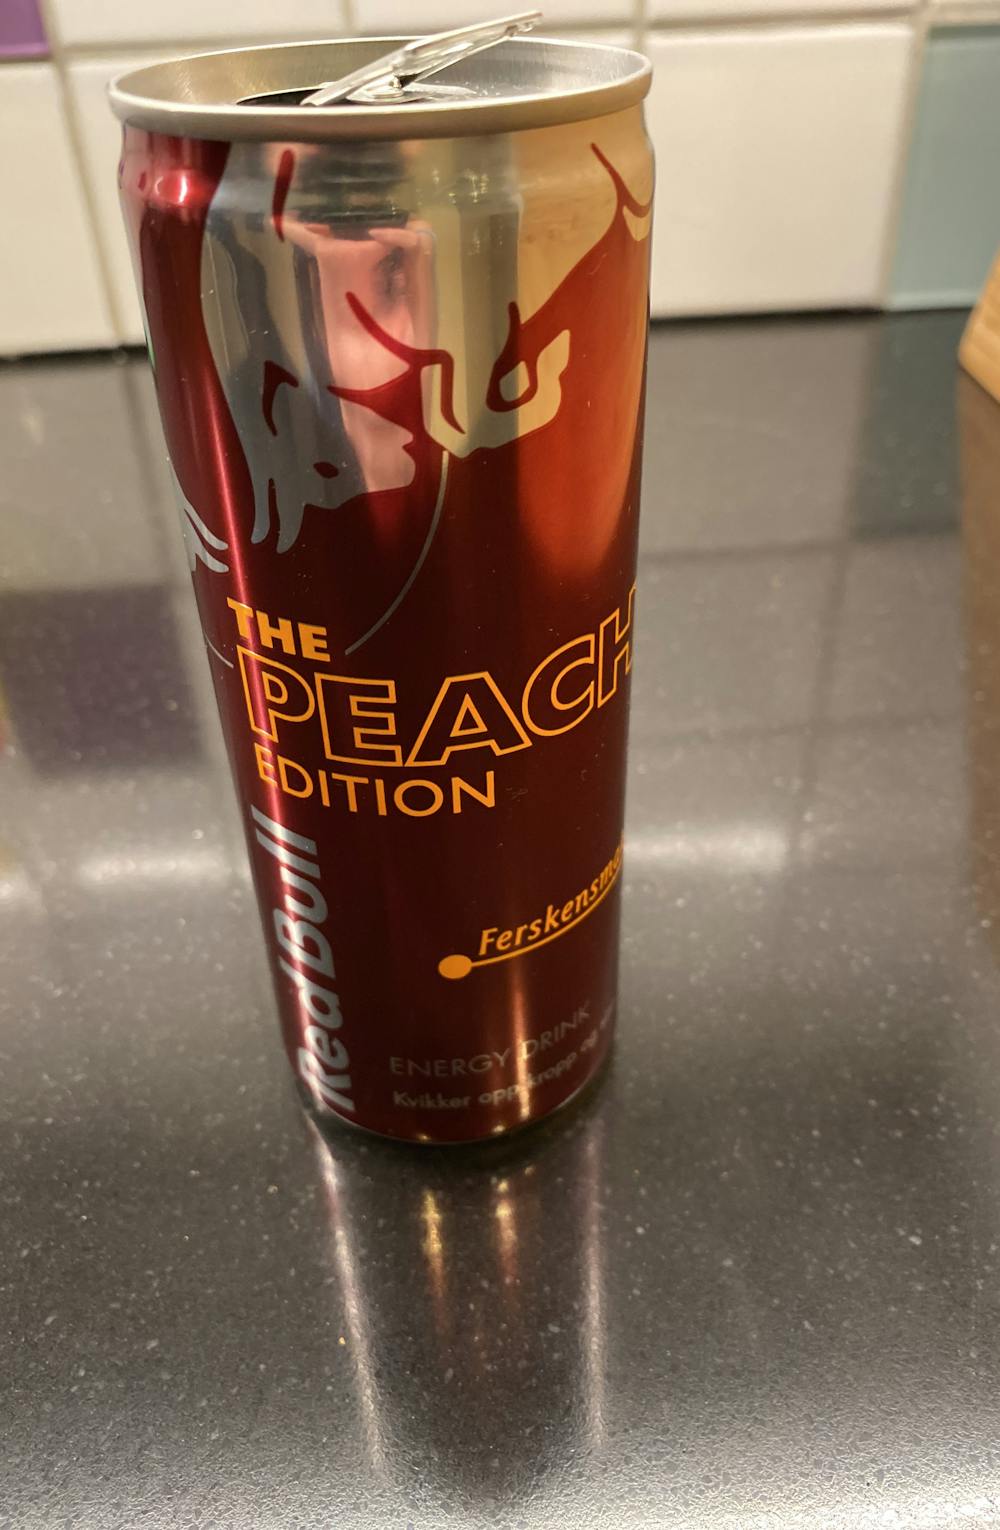 The peach edition, Red bull